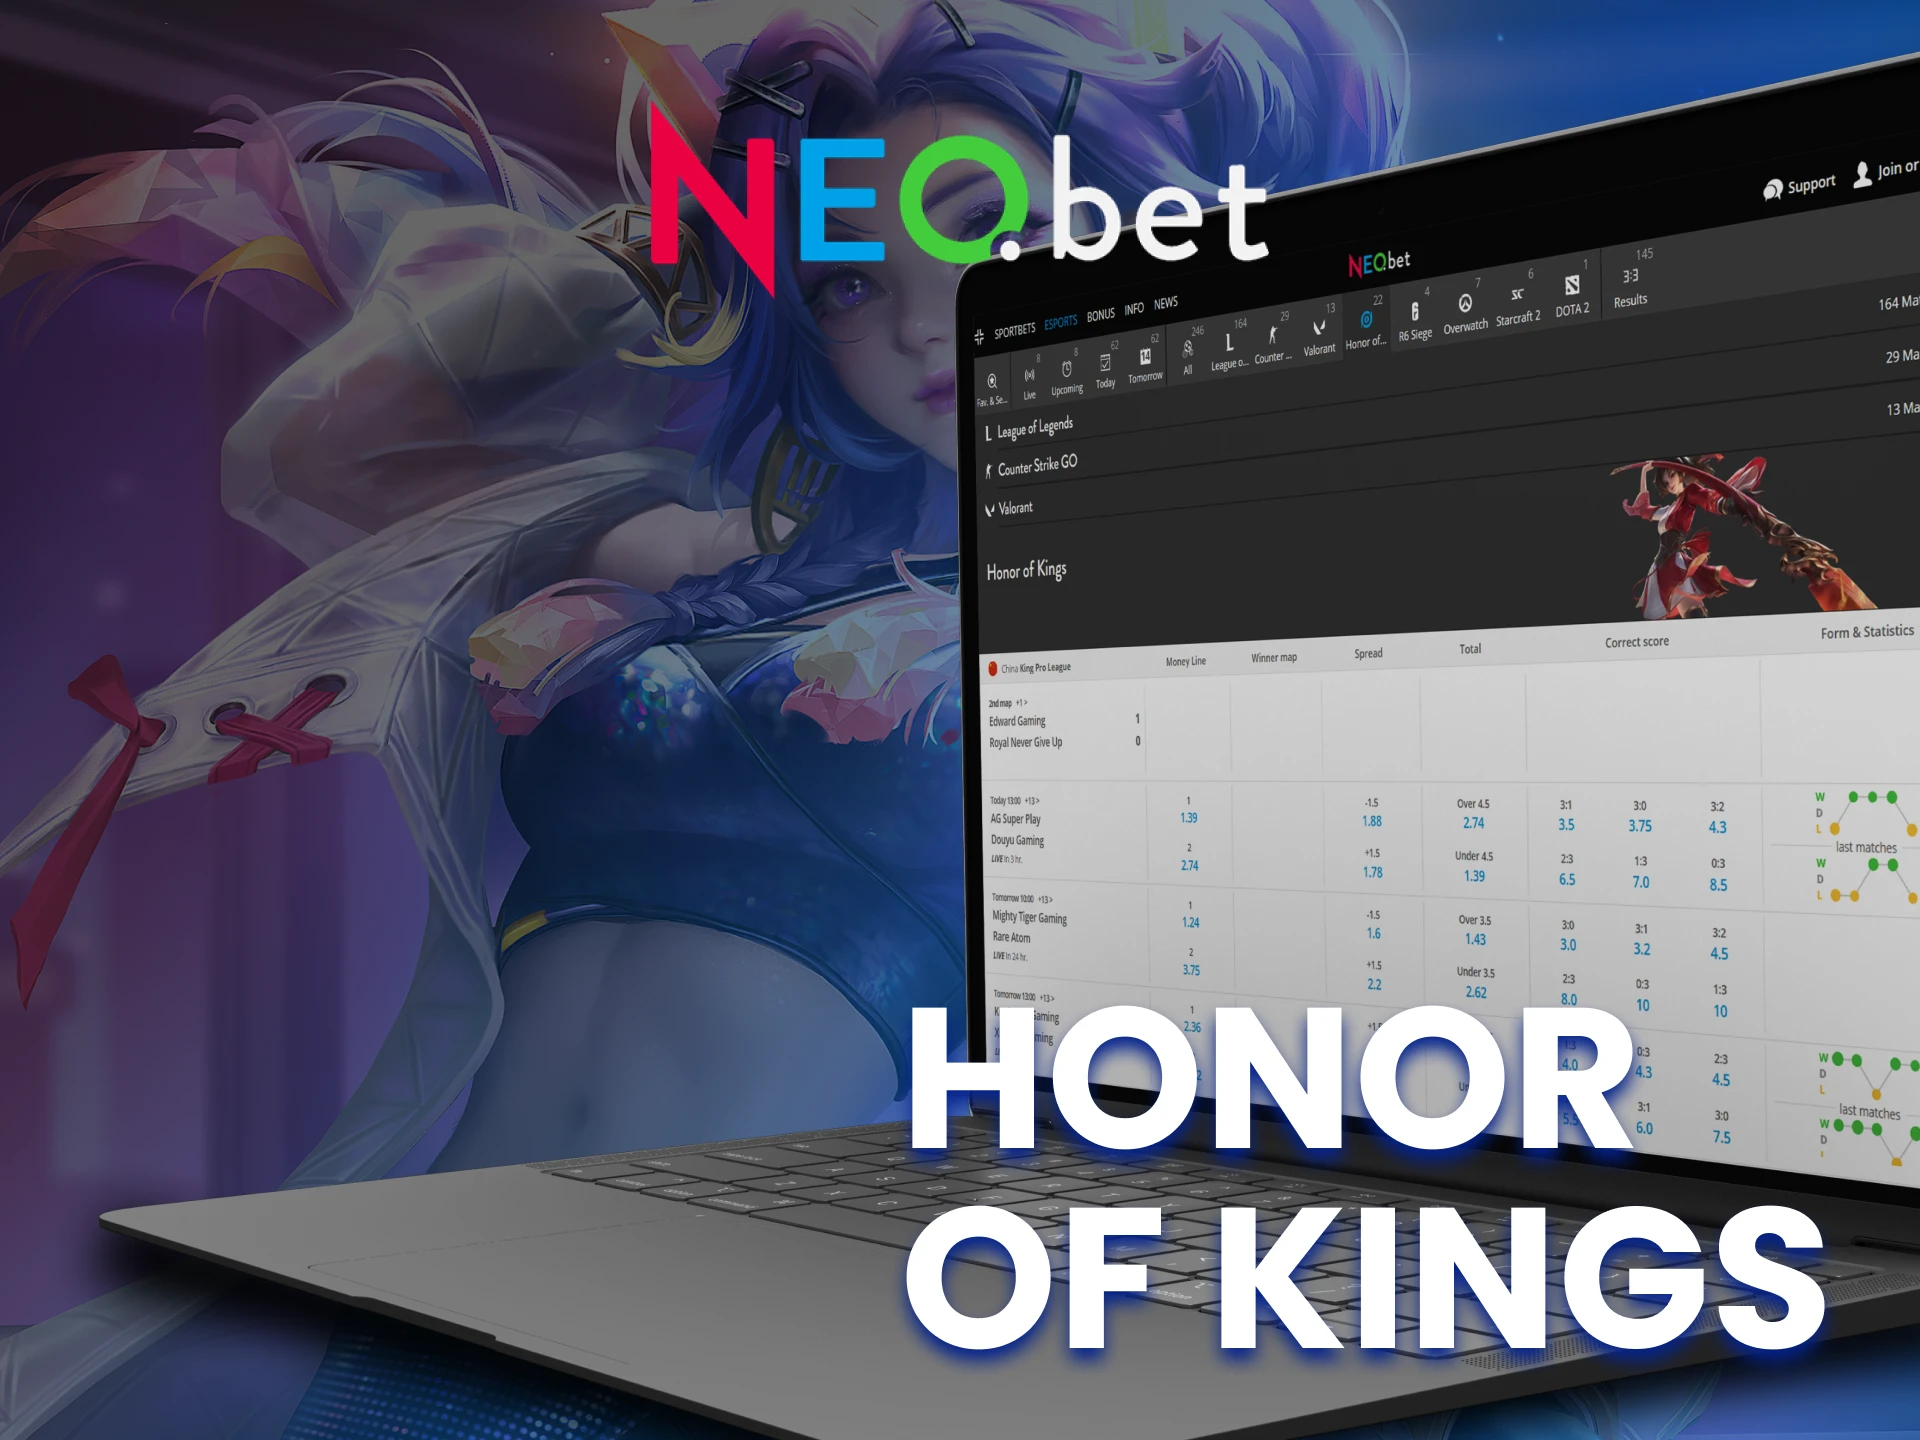 Bet on Honor of Kings with NEO.bet.